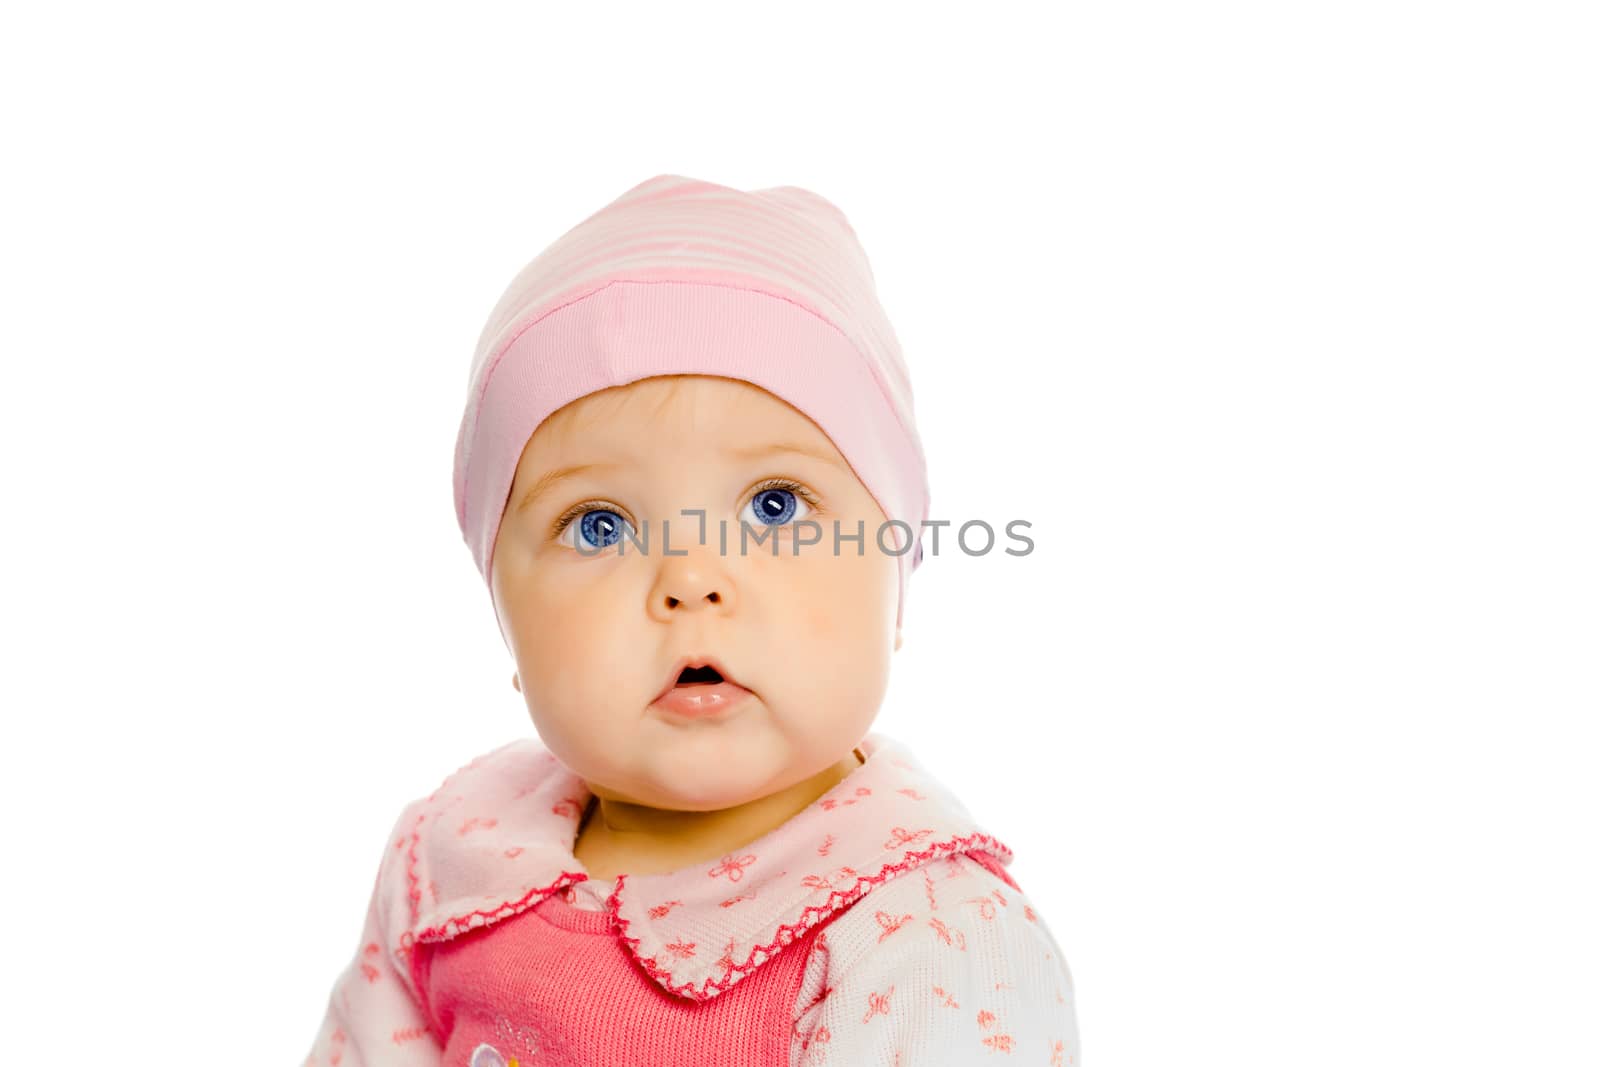 Cute baby girl in a pink dress and hat. Portrait. Studio. Isolated.